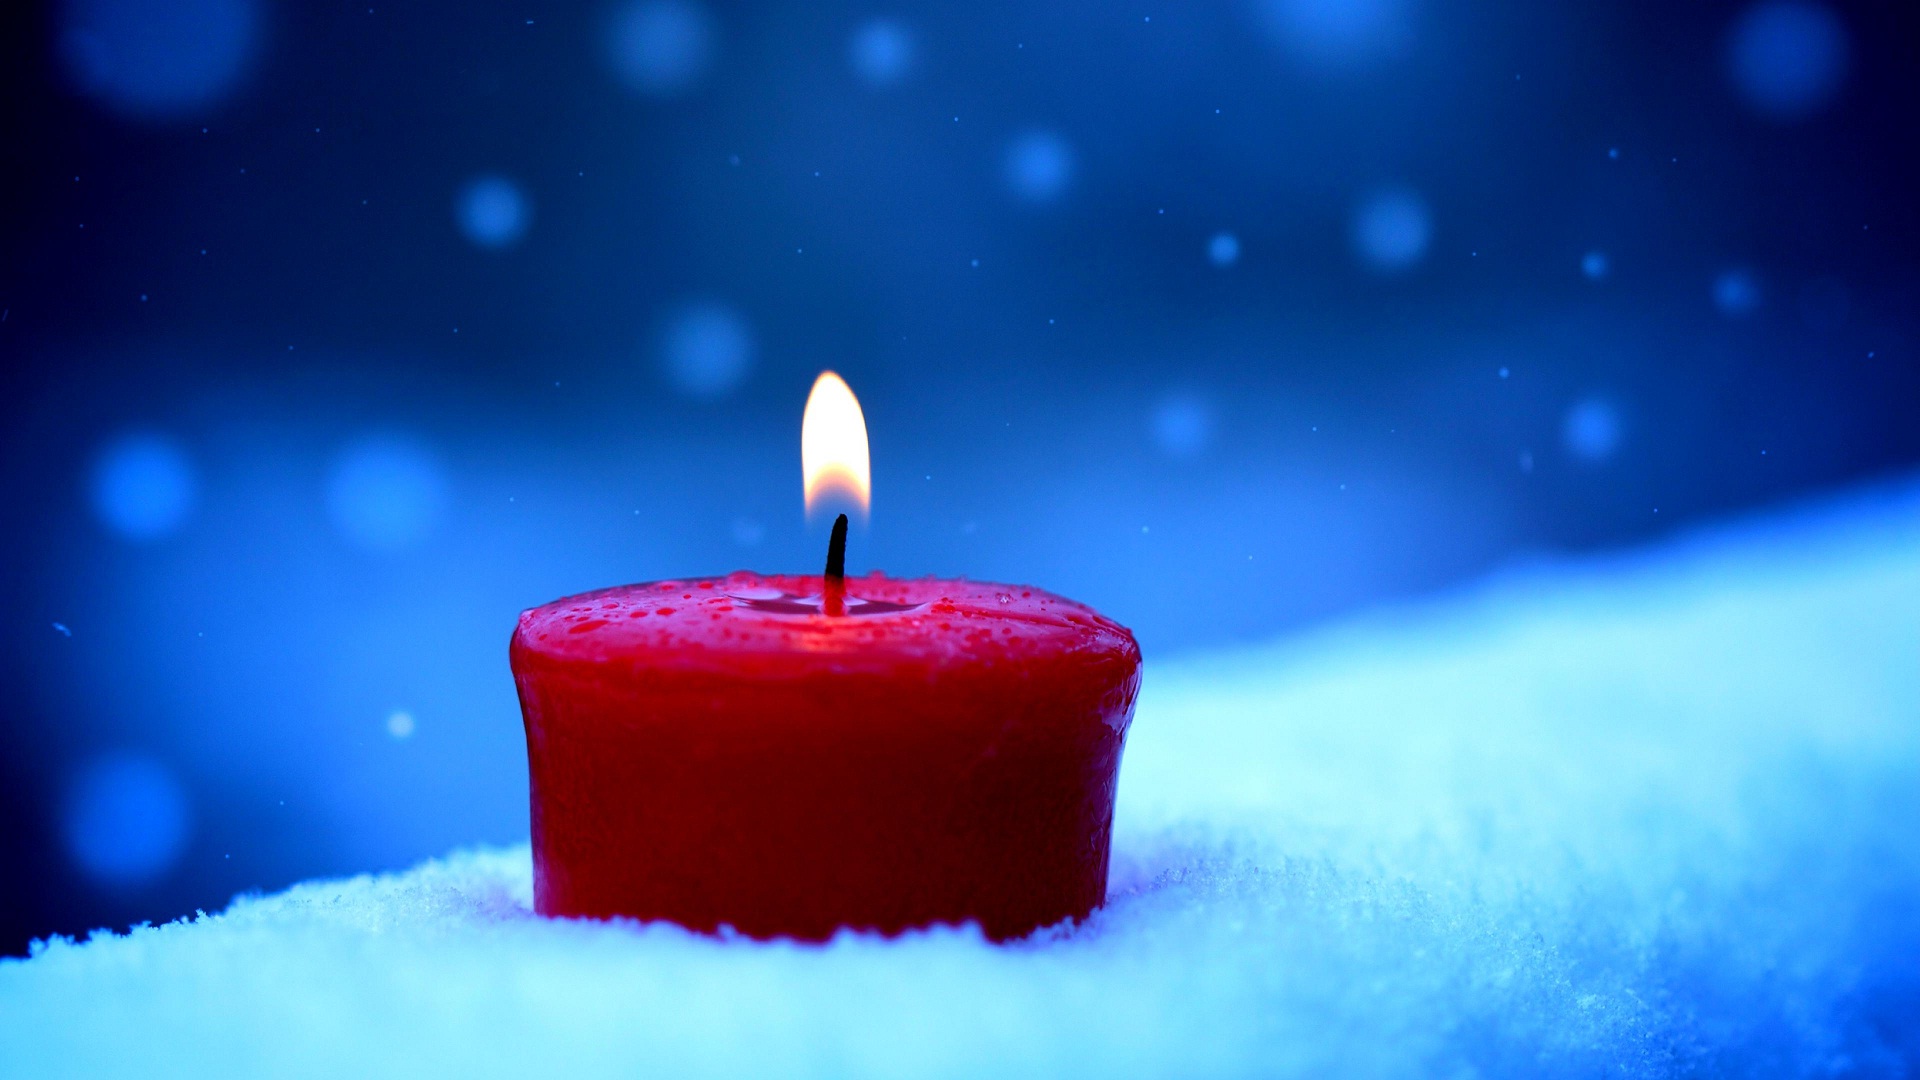 Candle-light-HD-picture.jpg